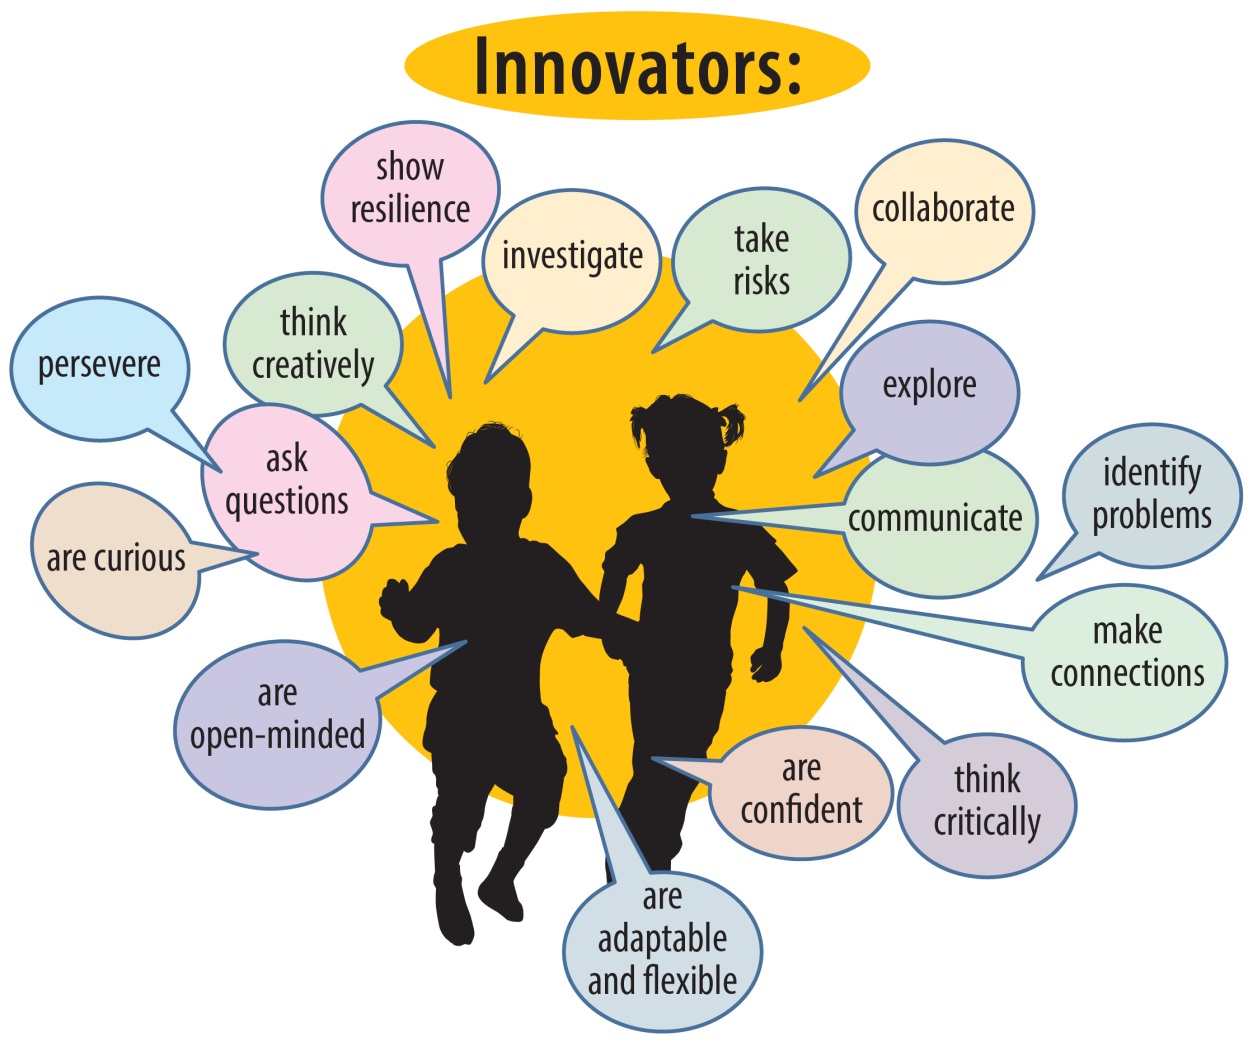 A graphic showing the silhouettes of two children, a boy and a girl, with the caption “Innovators”. Around the silhouettes are numerous speech bubbles that read as follows, clockwise from top: “investigate”, “take risks”, “collaborate”, “explore”, “communicate”, “identify problems”, “make connections”, “think critically”, “are confident”, “are adaptable and flexible”, “are open-minded”, “are curious”, “ask questions”, “persevere”, “think creatively”, and “show resilience”.